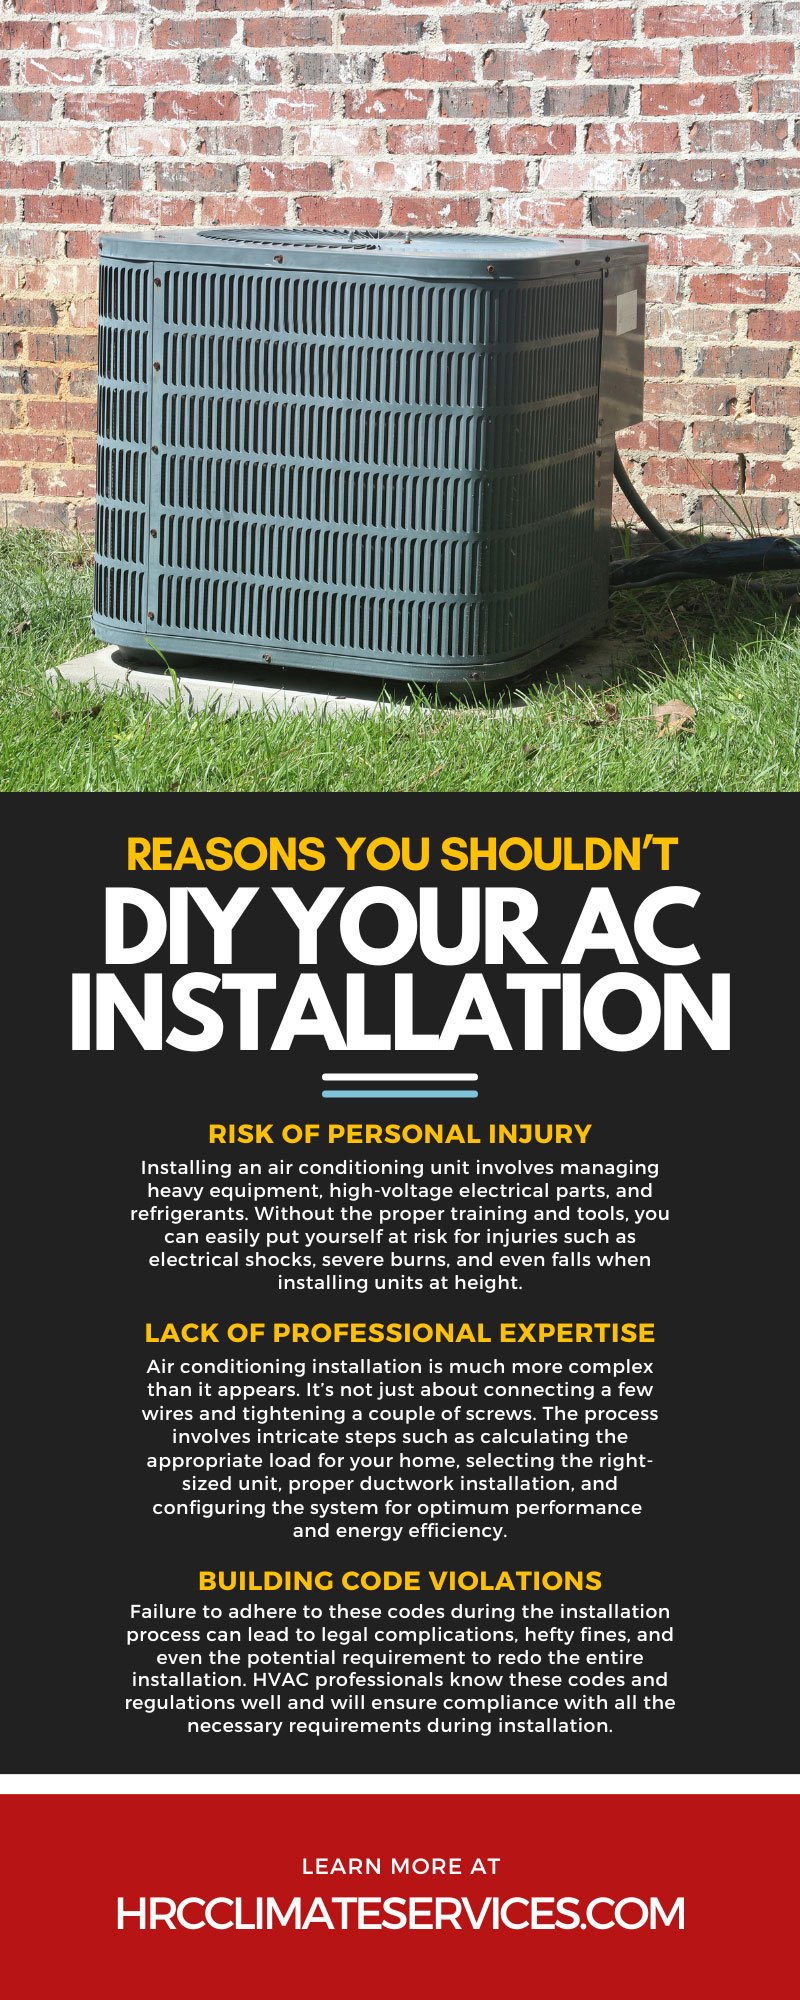 8 Reasons You Shouldn’t DIY Your AC Installation